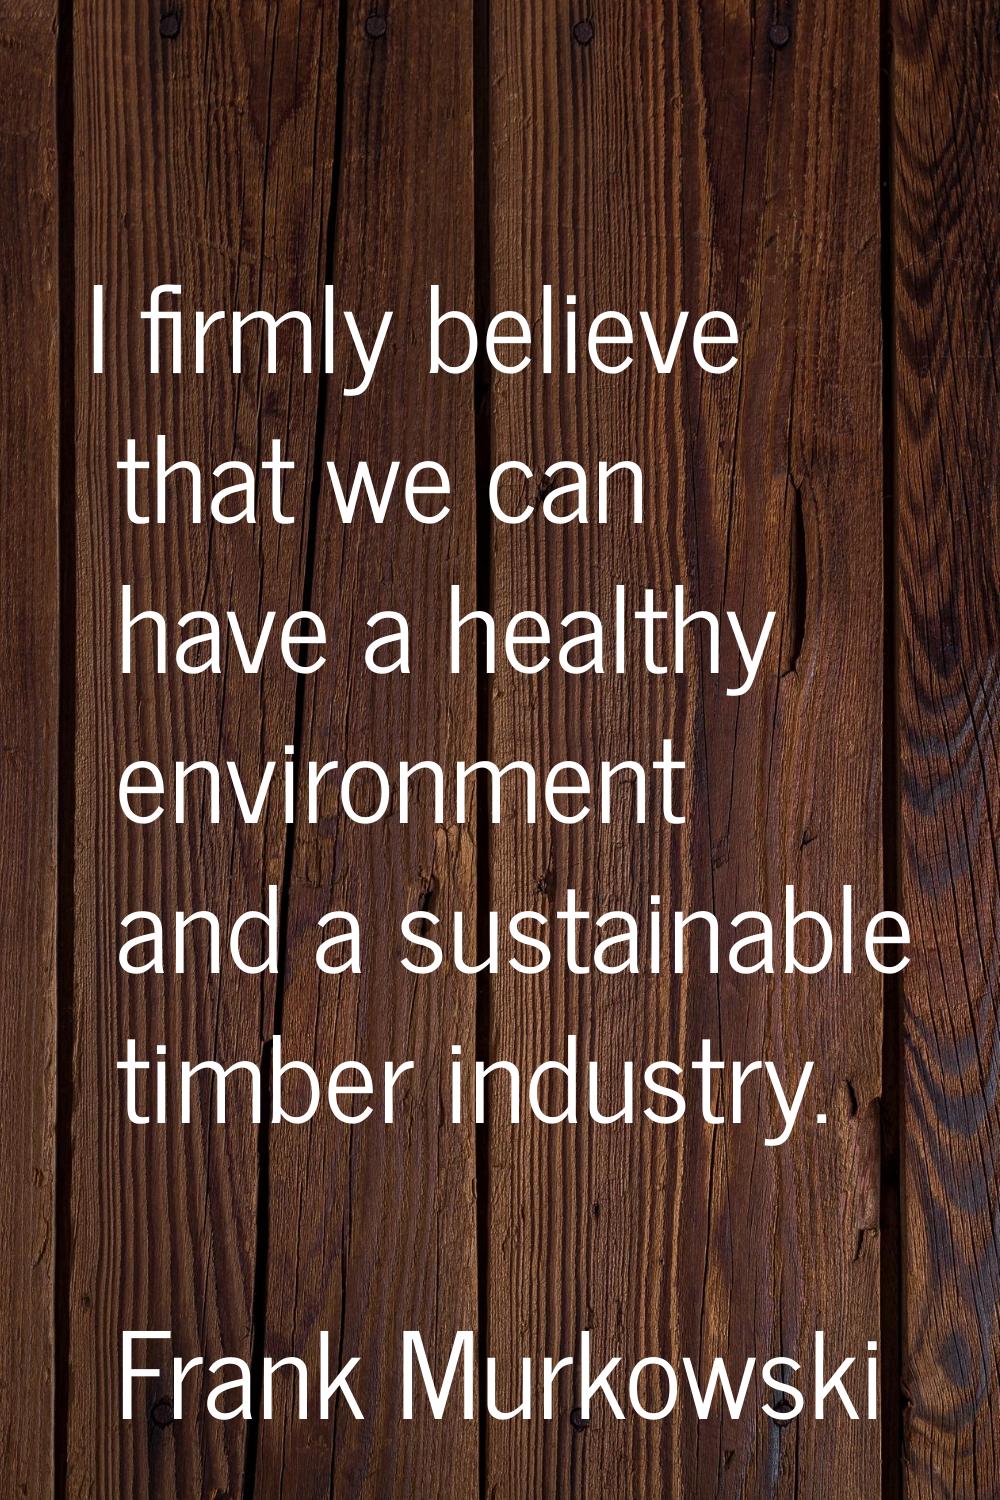 I firmly believe that we can have a healthy environment and a sustainable timber industry.